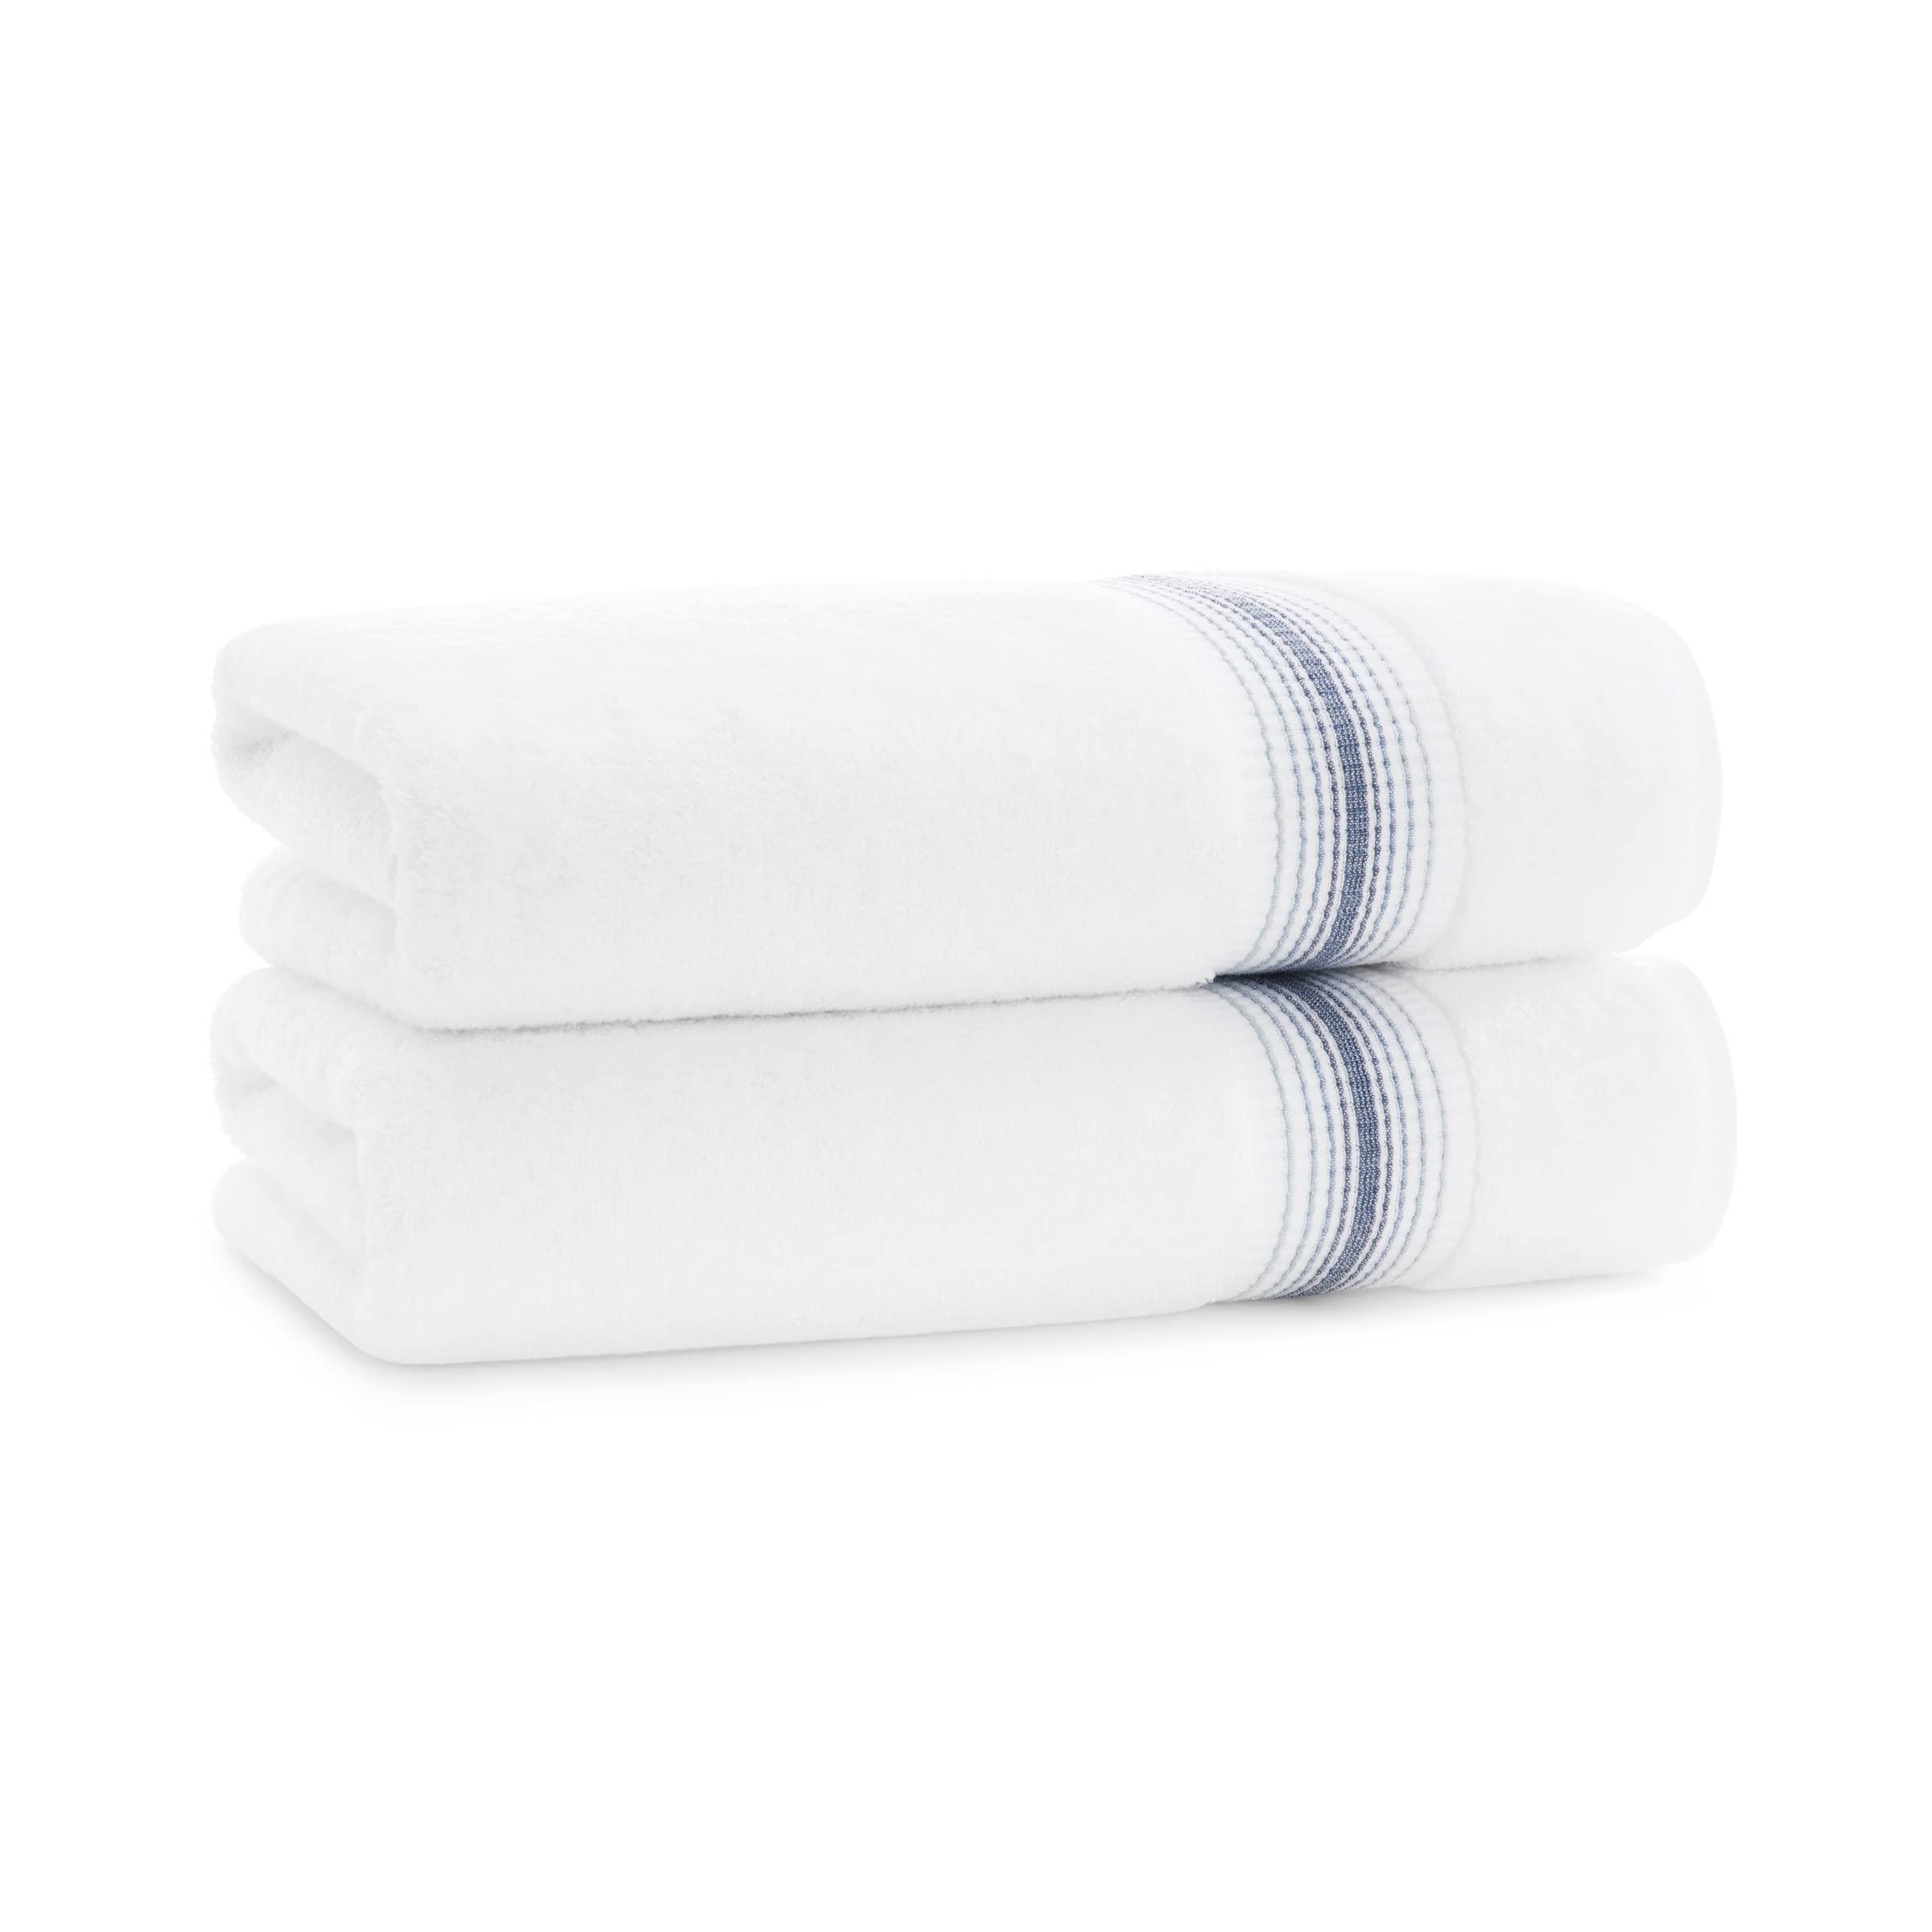 Hand Towels, Home Soft Face Towels for Bathroom Cotton Gym Towels Absorbent Small Towels for Bath, Face and Spa, Size: Luxury Turkish Cotton White